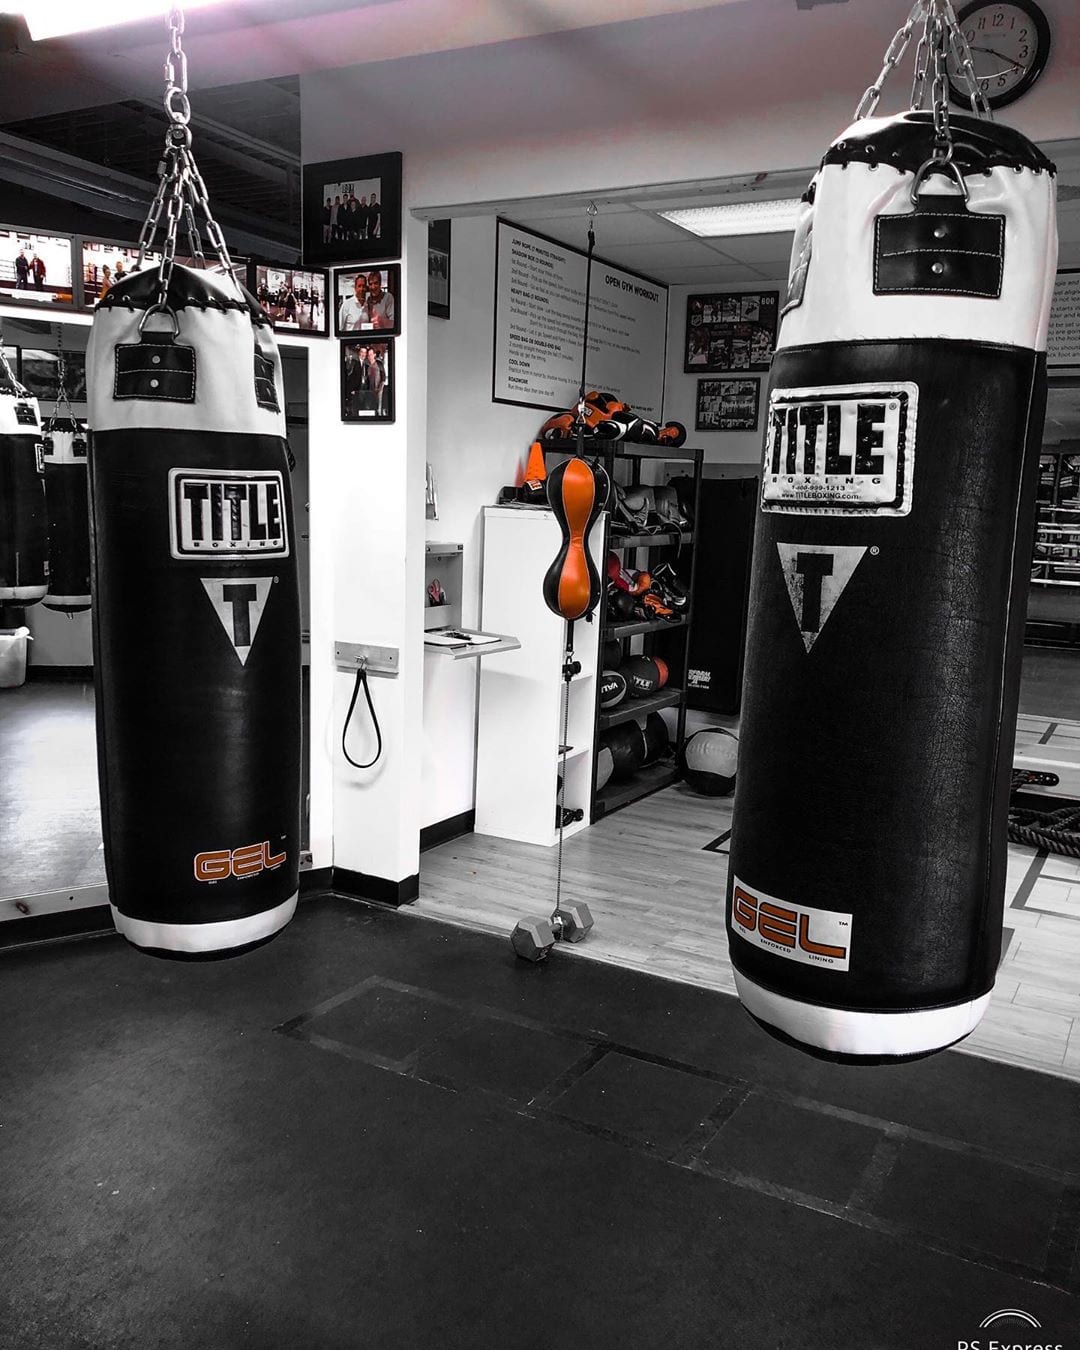 The warm weather is here, Contact us Today to try one of the best workouts in the Boston area in Dedham, Ma , located next Legacy Place shopping center . . (781)727-9503 . #boxing #thebestofthebest #fitness #workoutmotivation #exercise #motivation #feelgood #fightfit #boxinglessons #boxingworkout #boxingtraining #cardio #conditioning #coaching #boxingcoach #Boston #Dedham